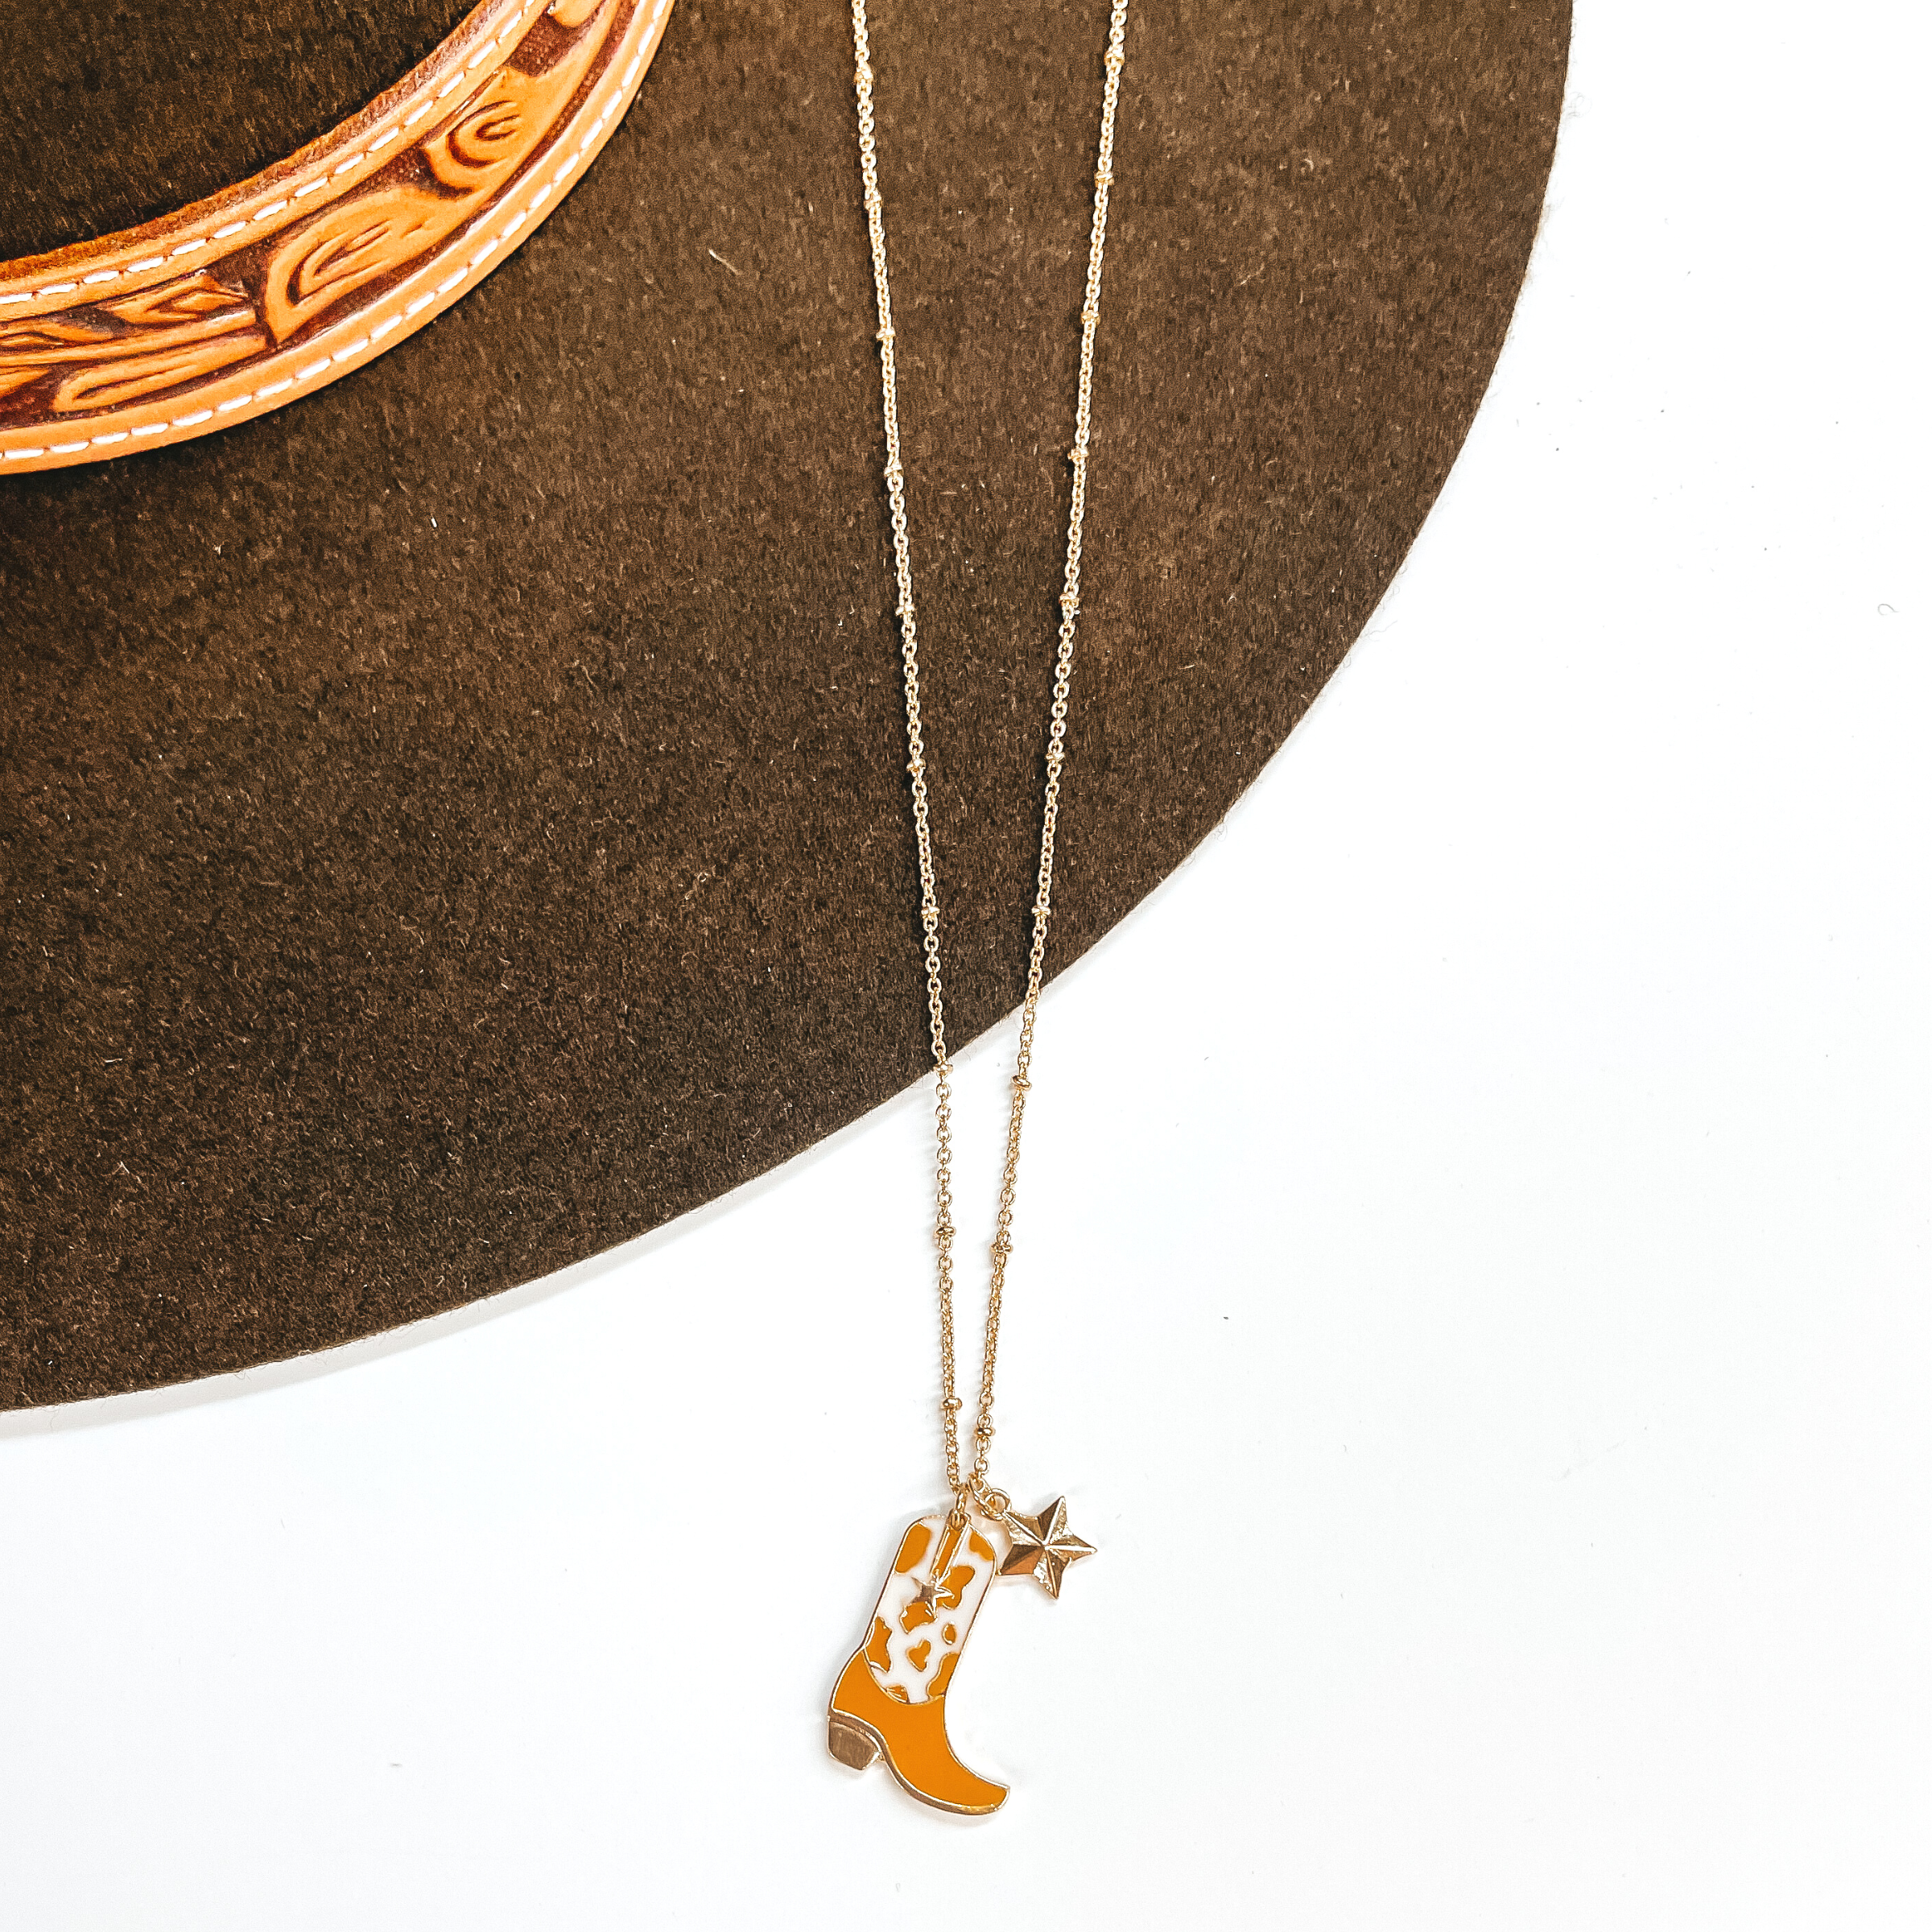 Kick Your Boots Up Gold Necklace with Cow Print Boot Pendant in Ivory and Tan - Giddy Up Glamour Boutique